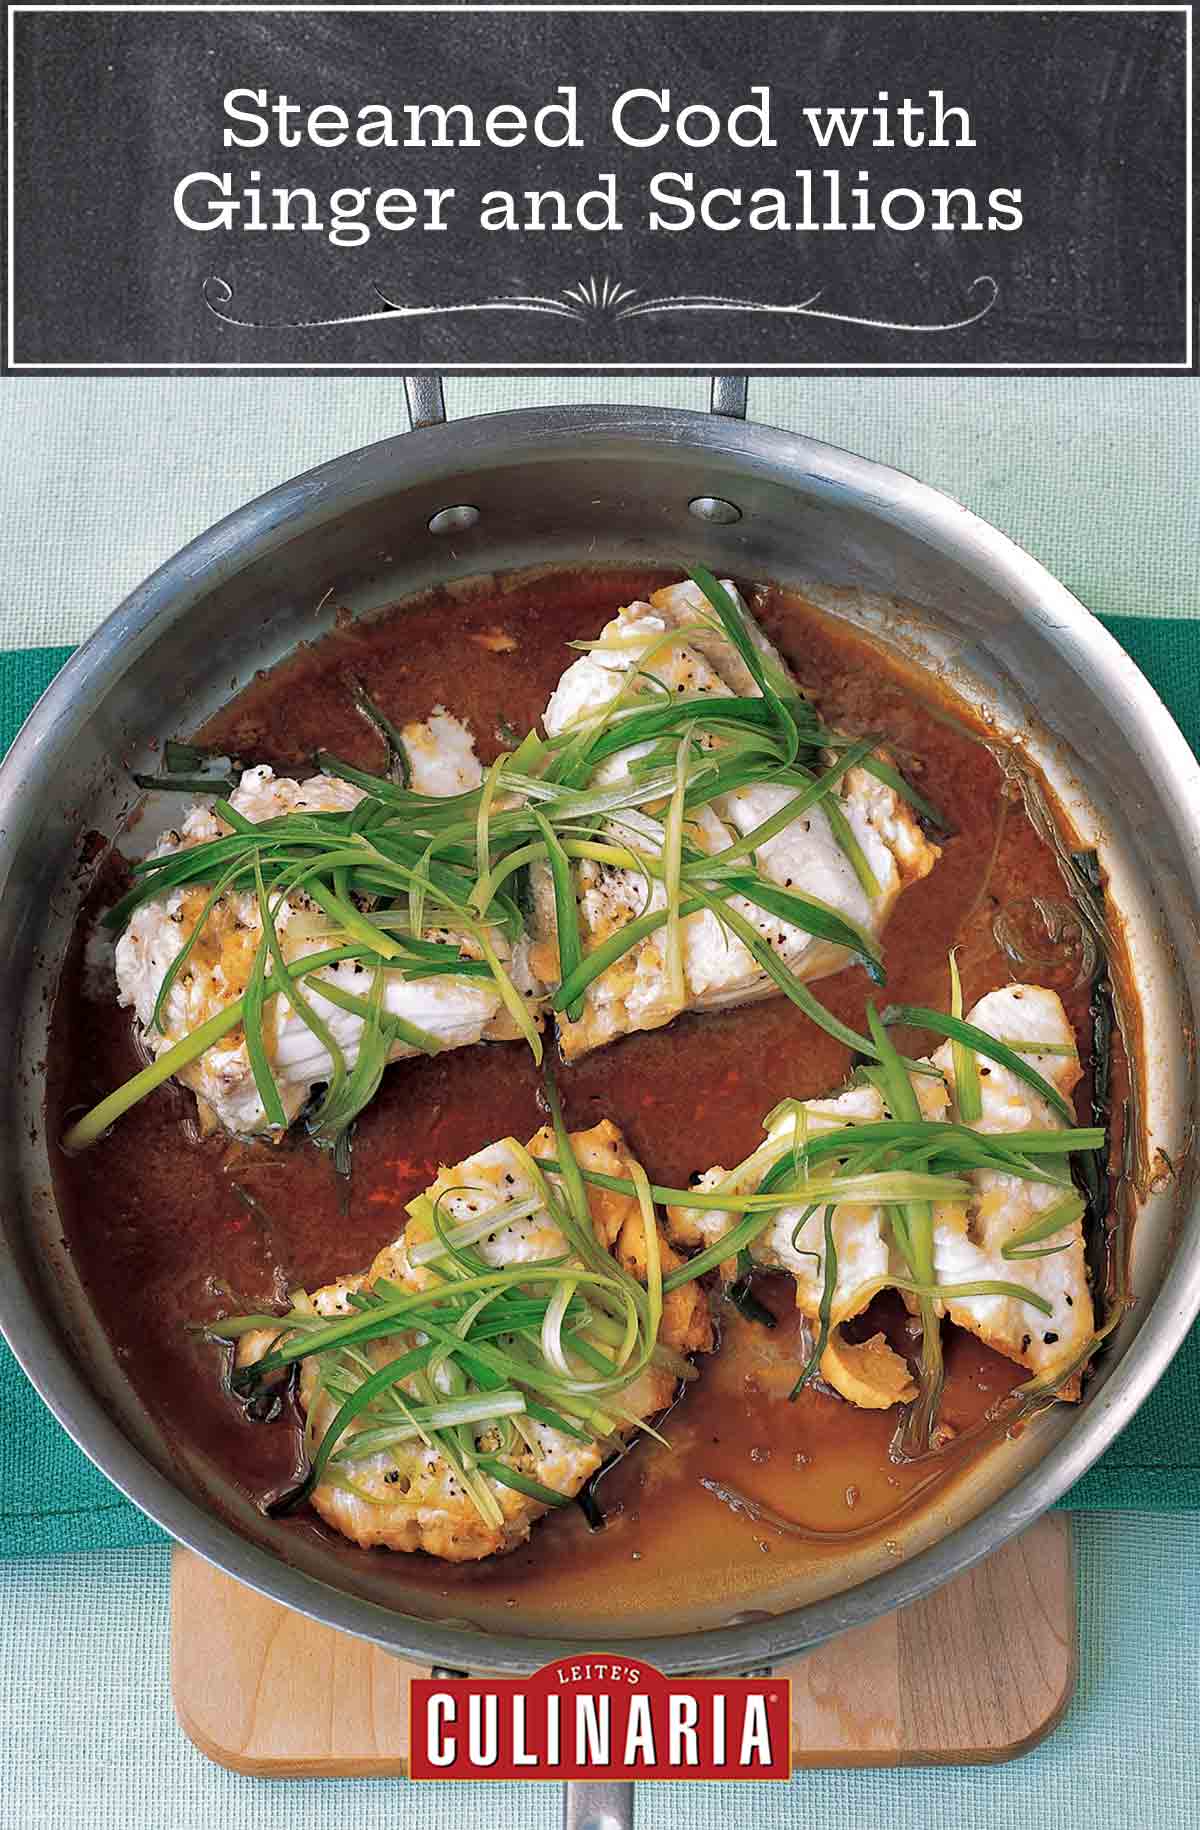 A metal skillet with four pieces of steamed cod with ginger and scallions.